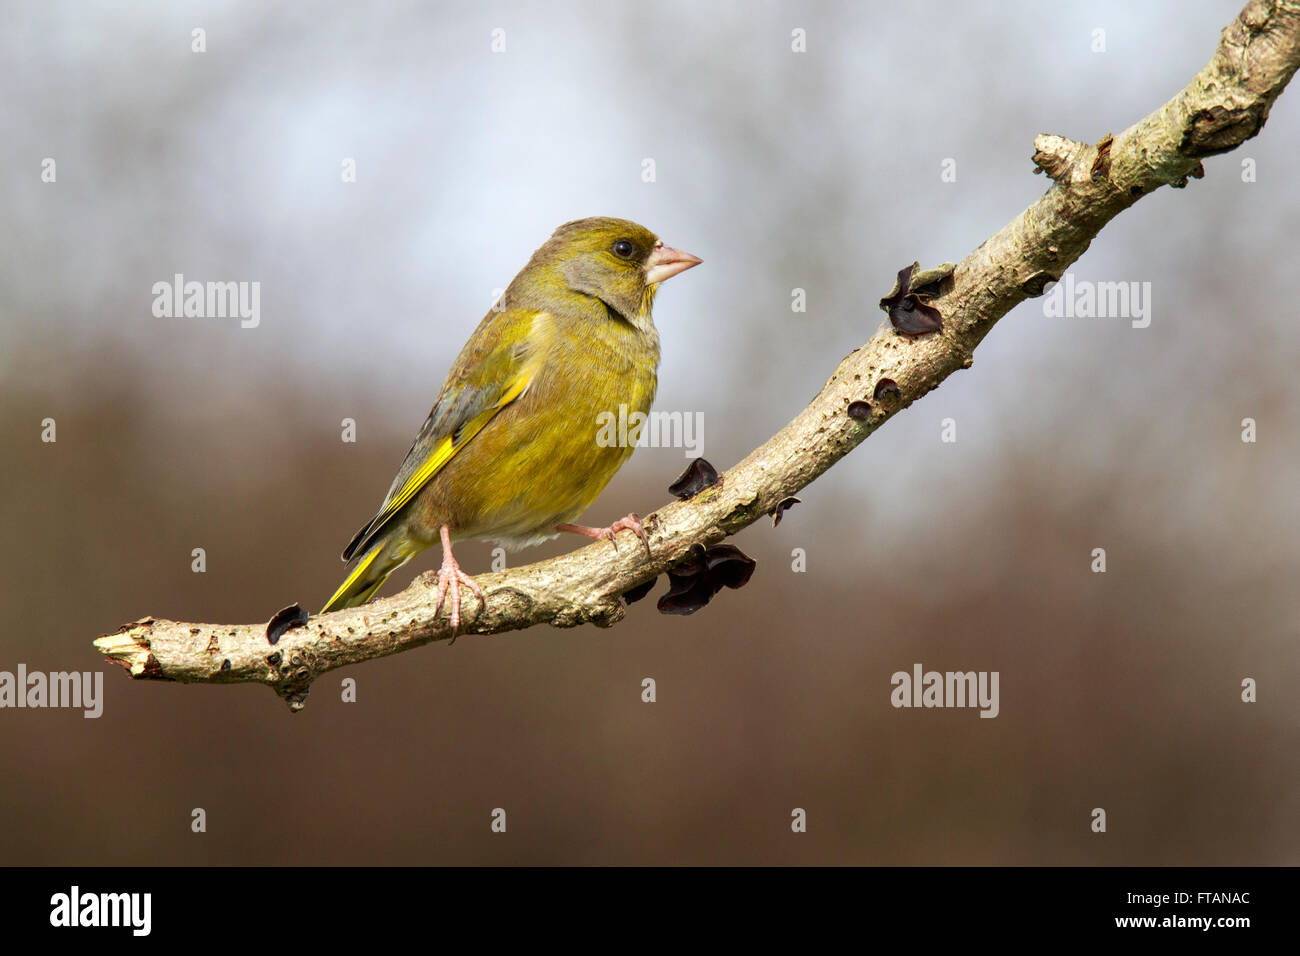 European Greenfinch Carduelis chloris adult perched Stock Photo